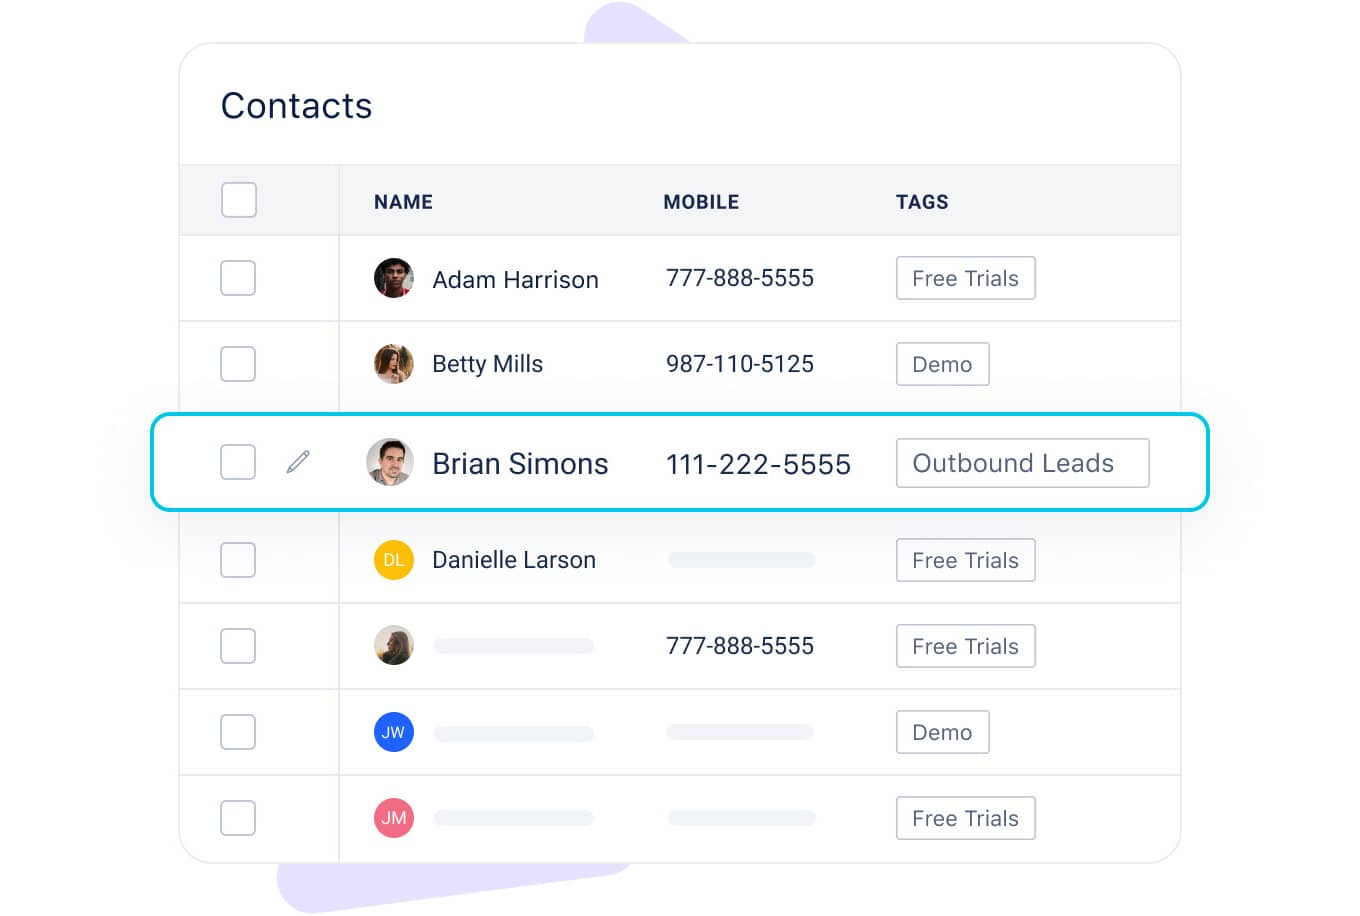 Manage leads and contacts